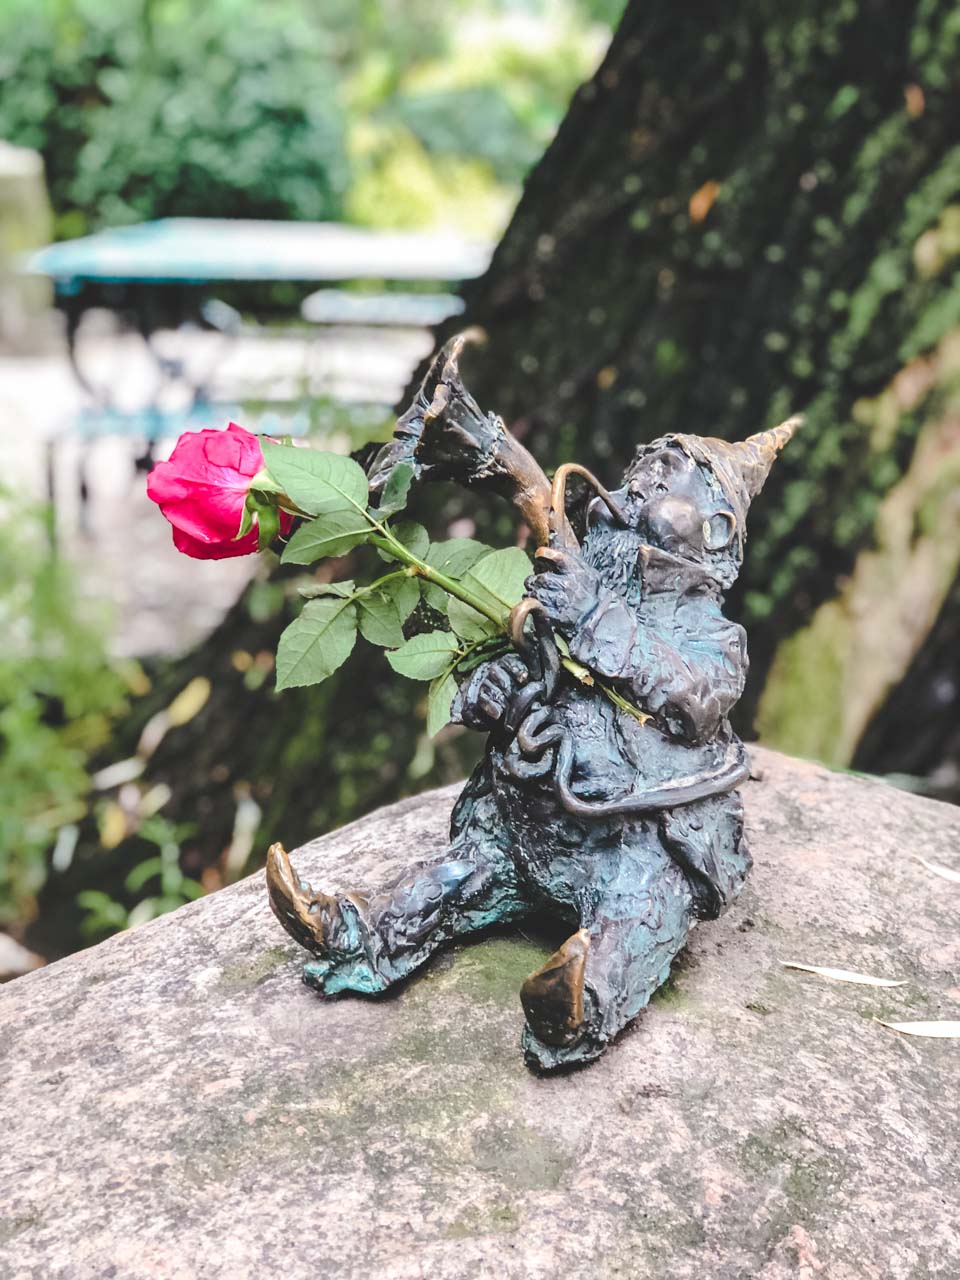 A figurine of a dwarf playing the trumpet with a red rose tucked under his arm